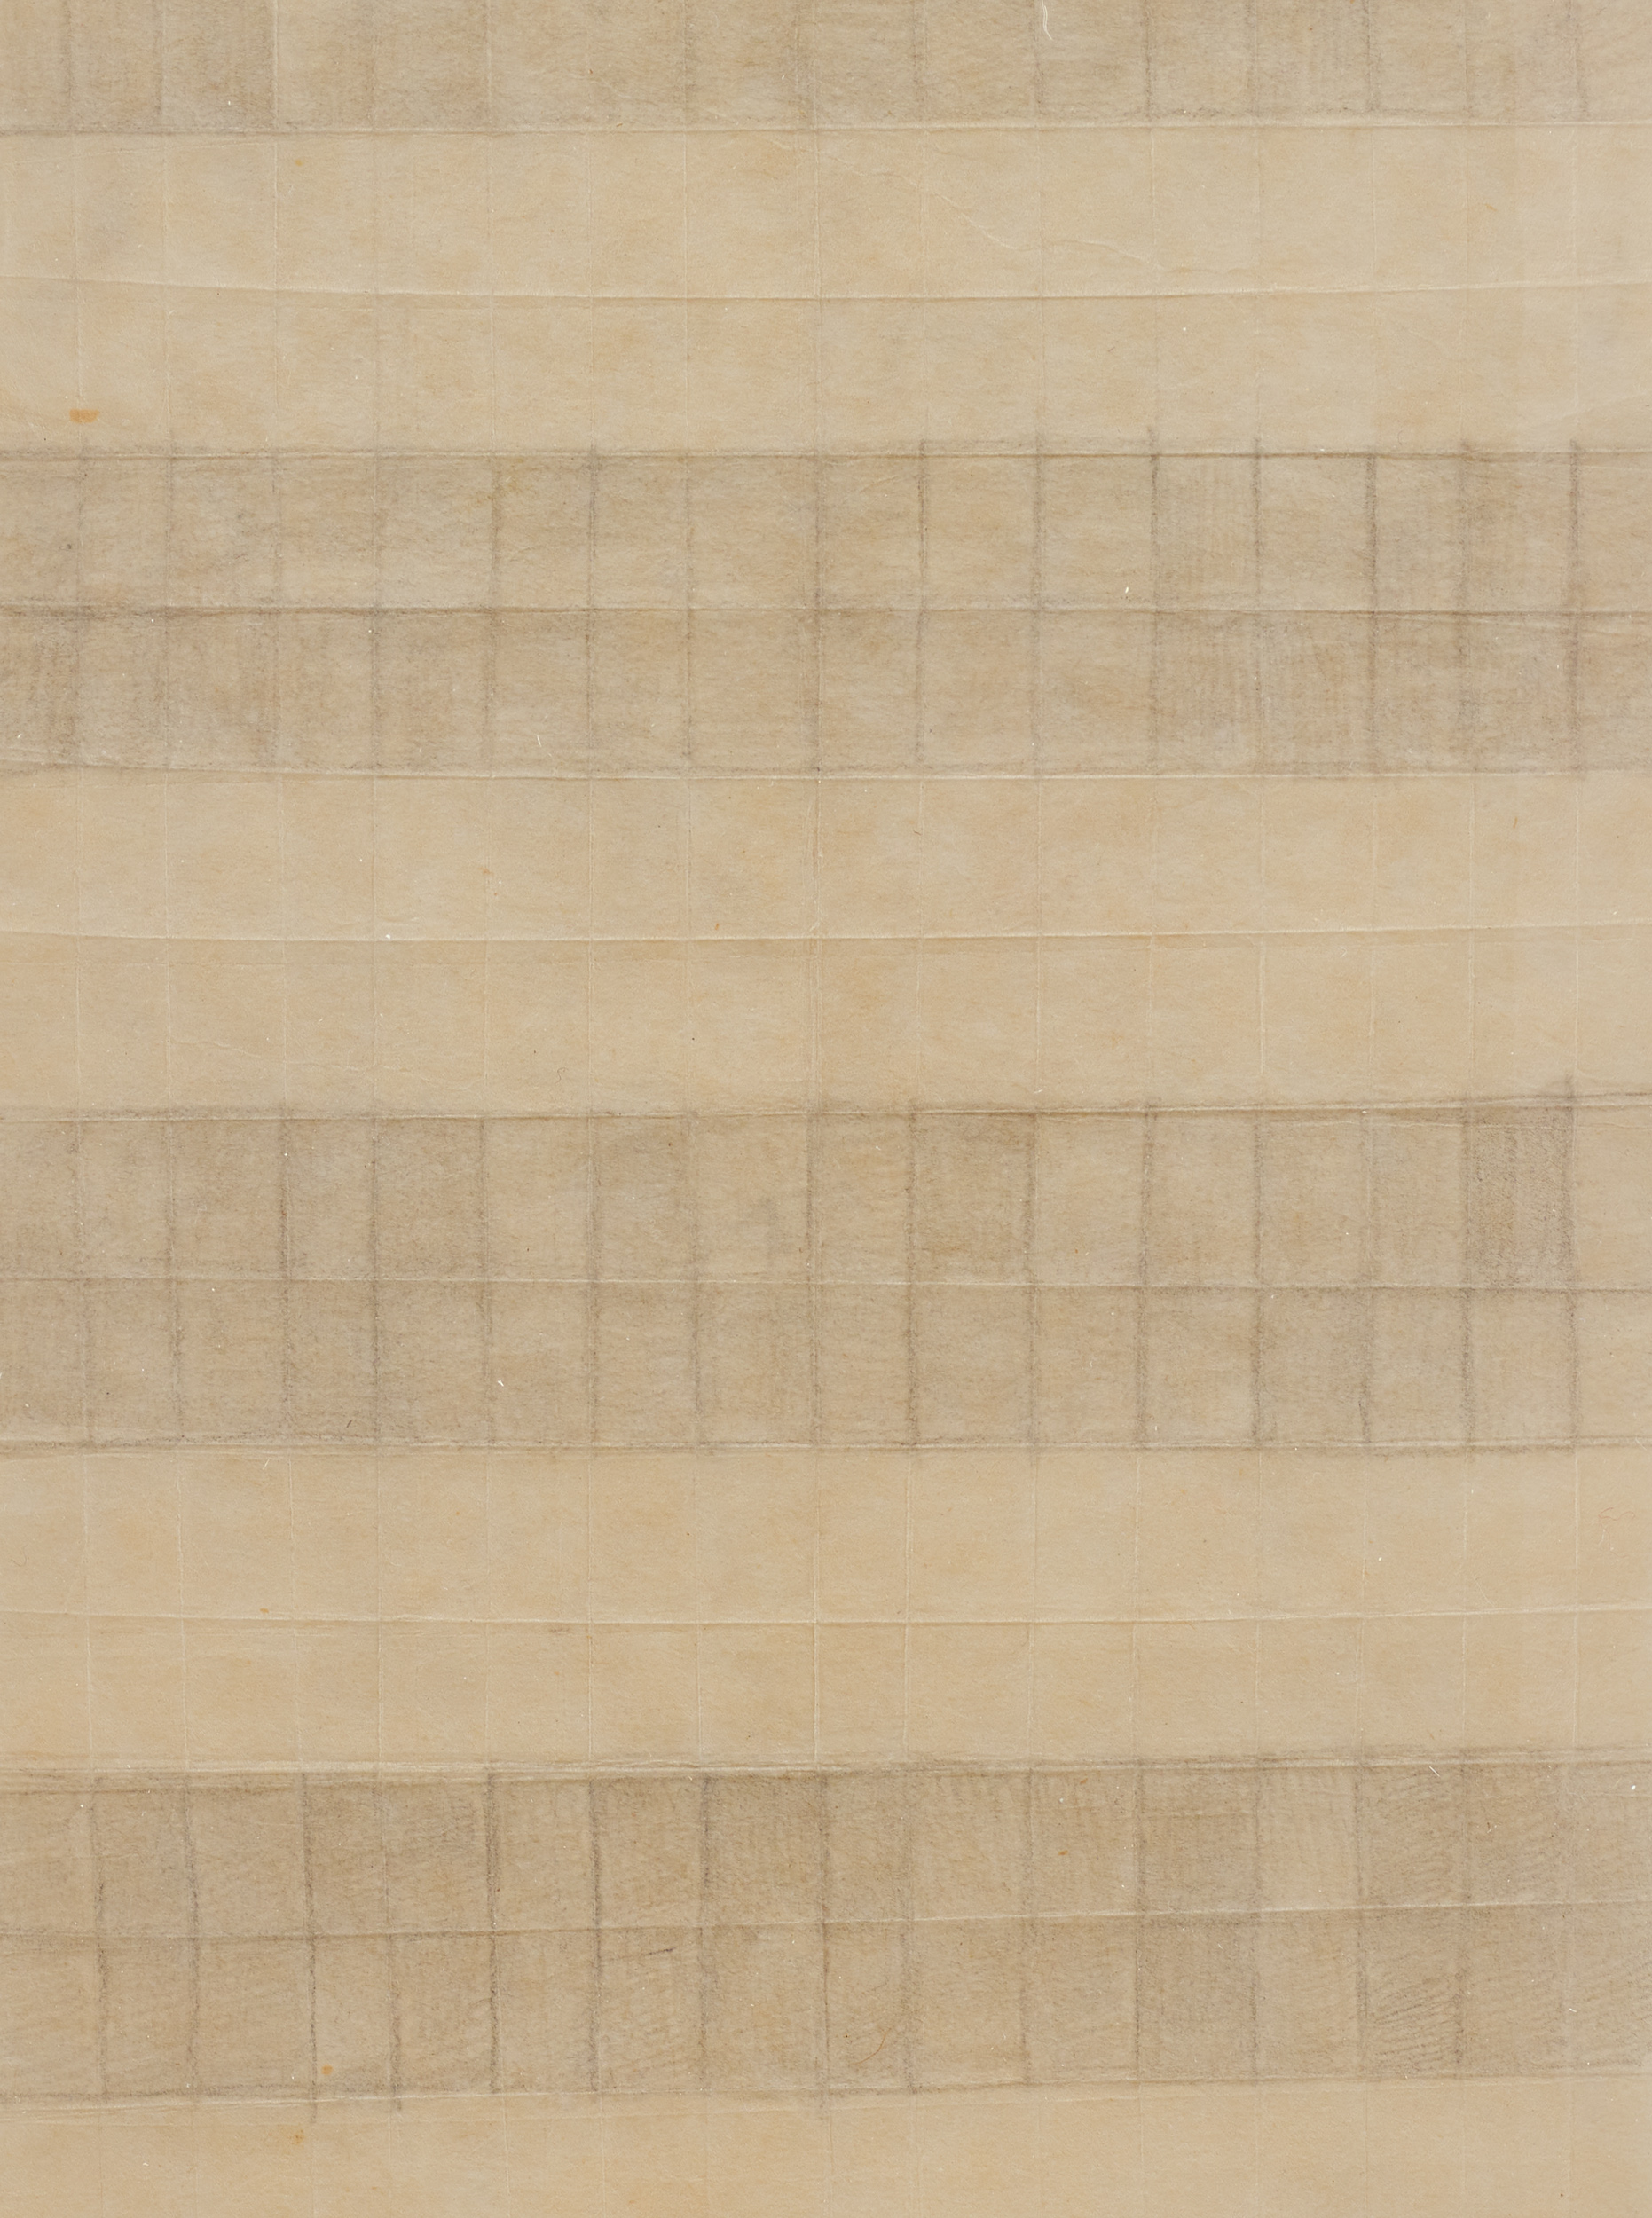 Detail view of Eleanore Mikus's Untitled pencil on folded paper work